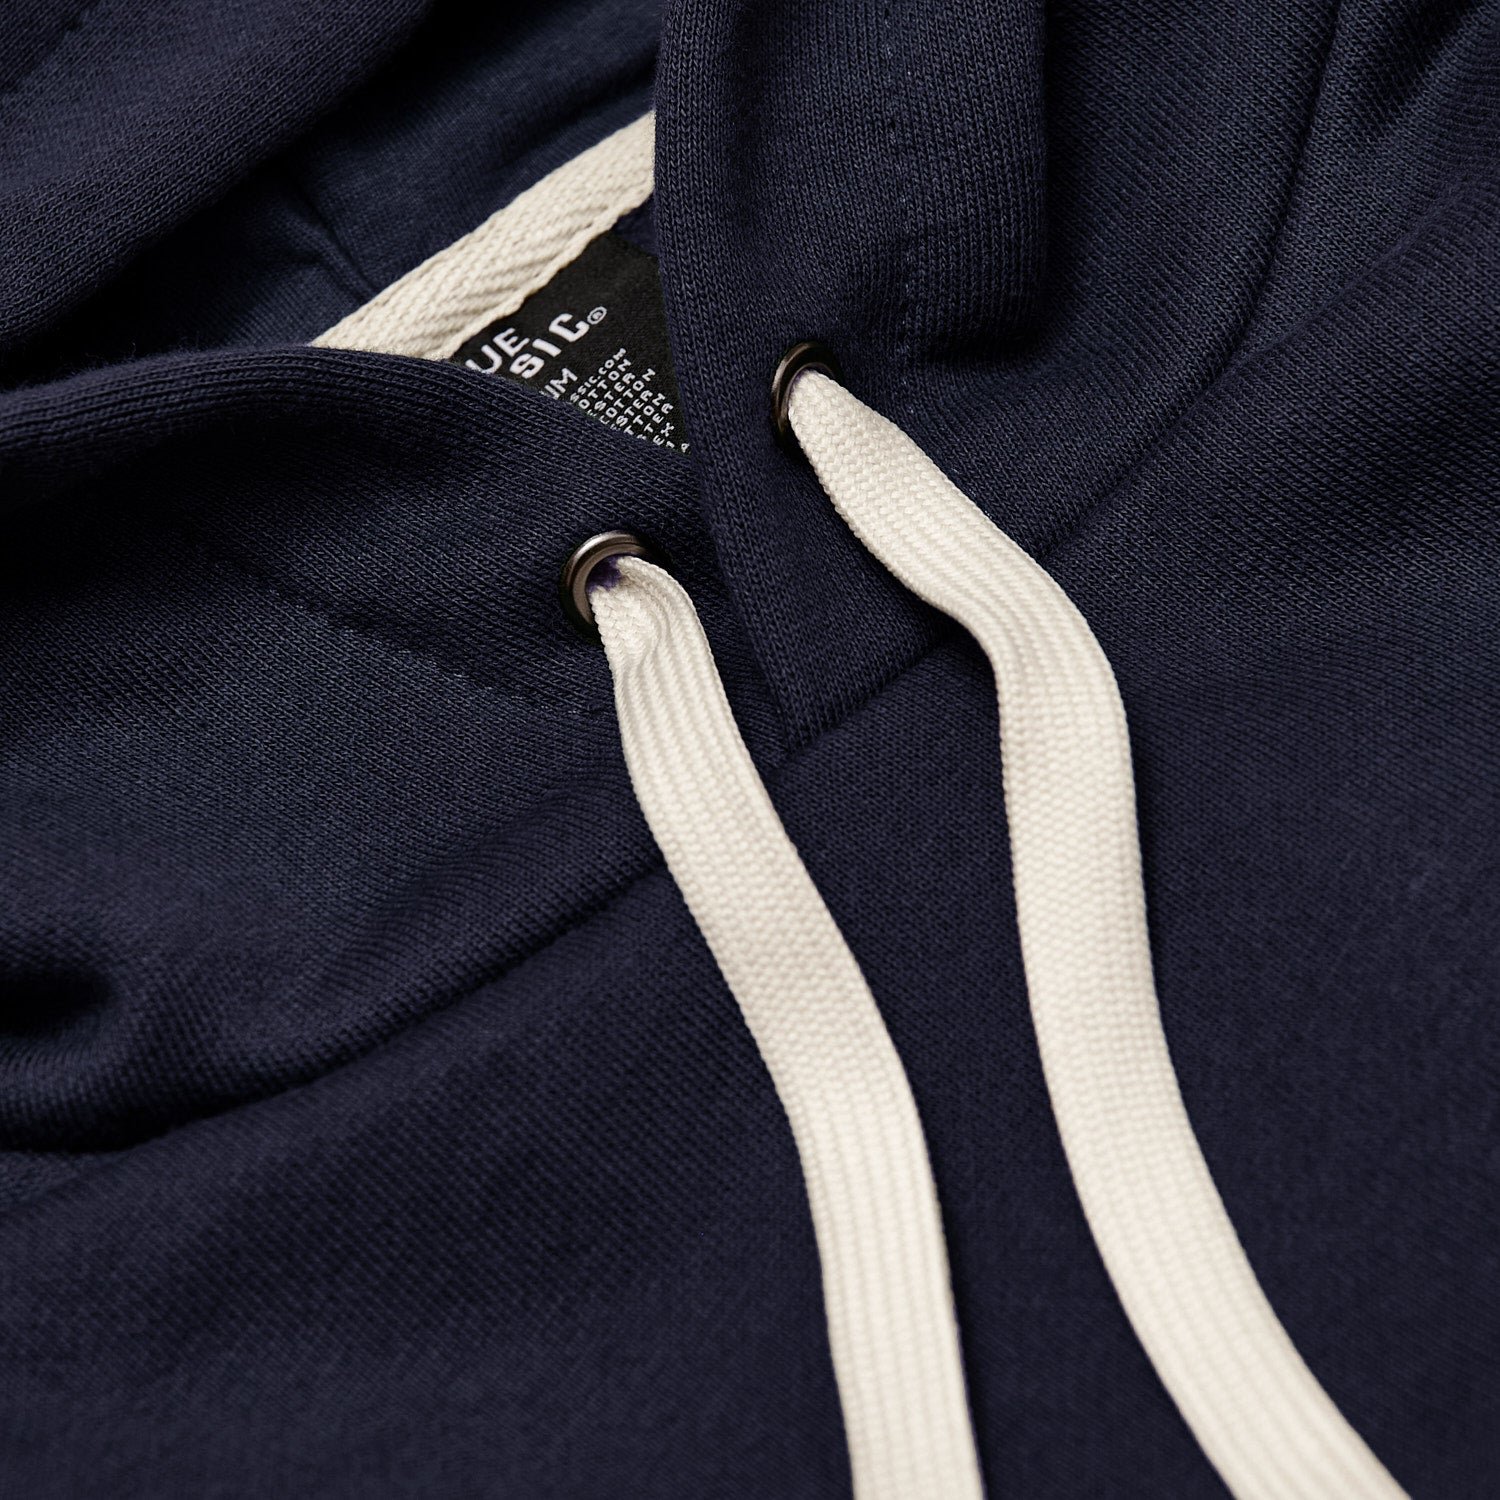 Navy Fleece French Terry Pullover Hoodie